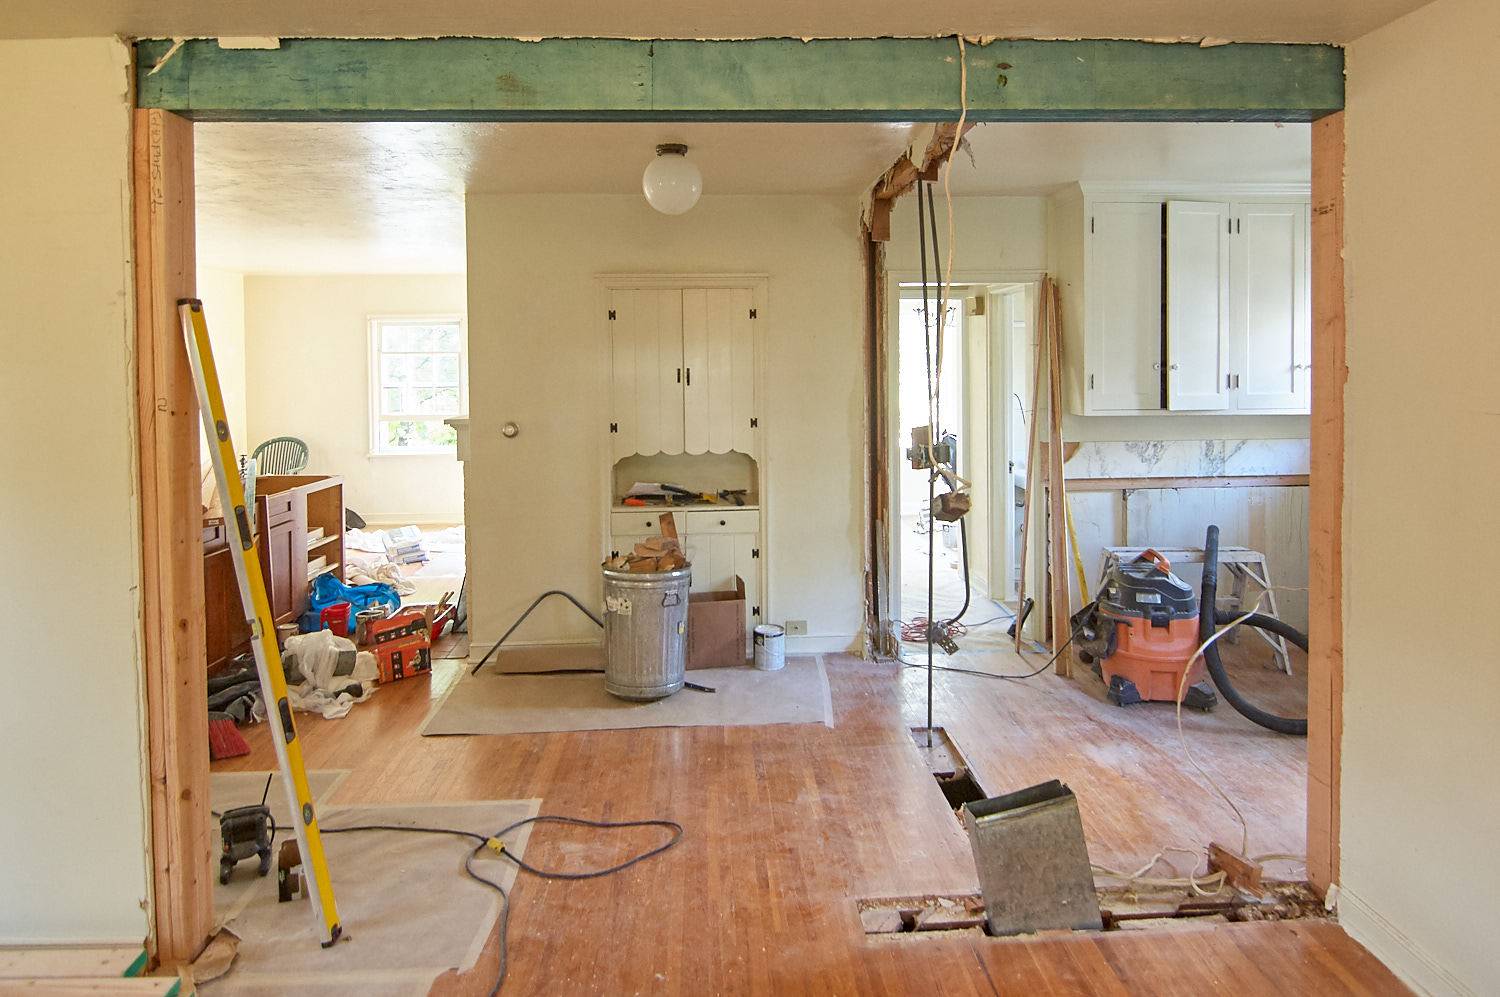 The interior of a house in the remodel stage, with tools laying around and a green support beam across the entryway.